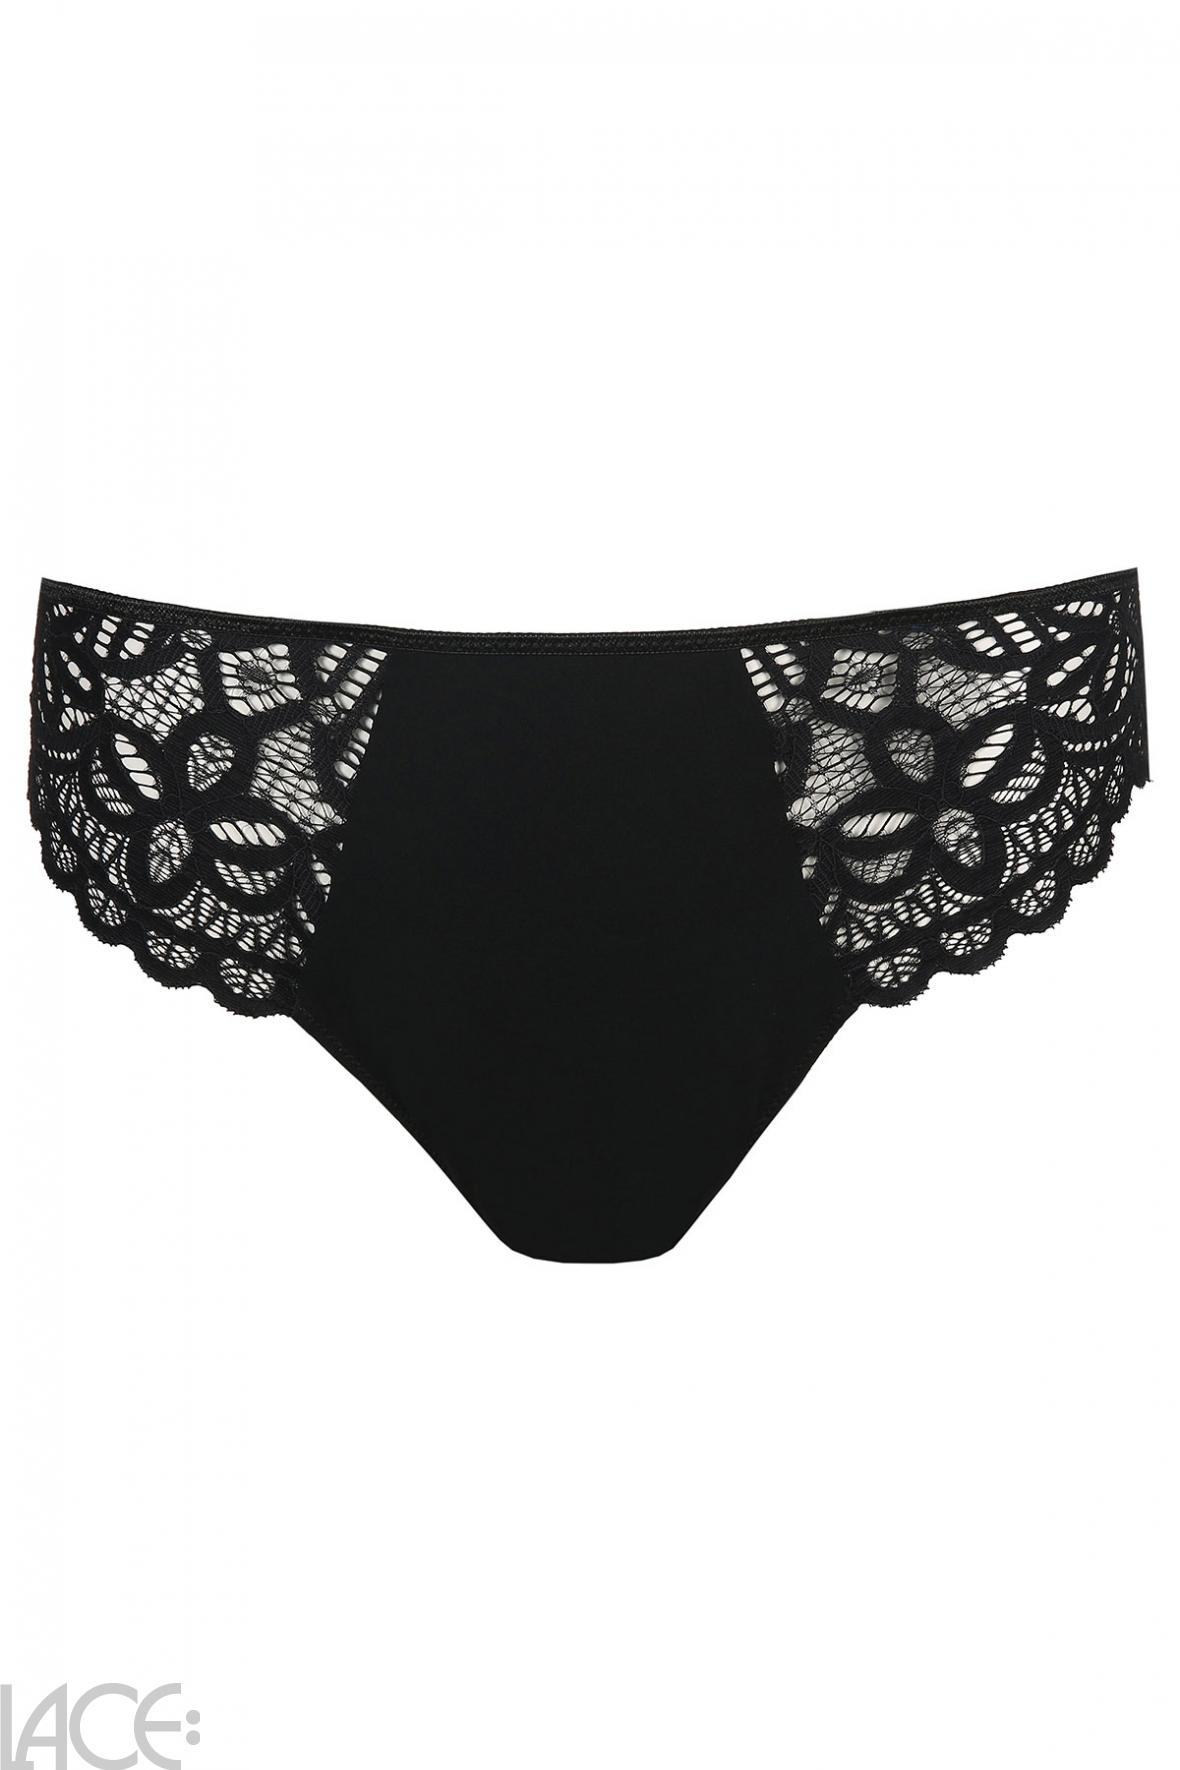 PrimaDonna Twist First Night Thong – Lace-Lingerie.com